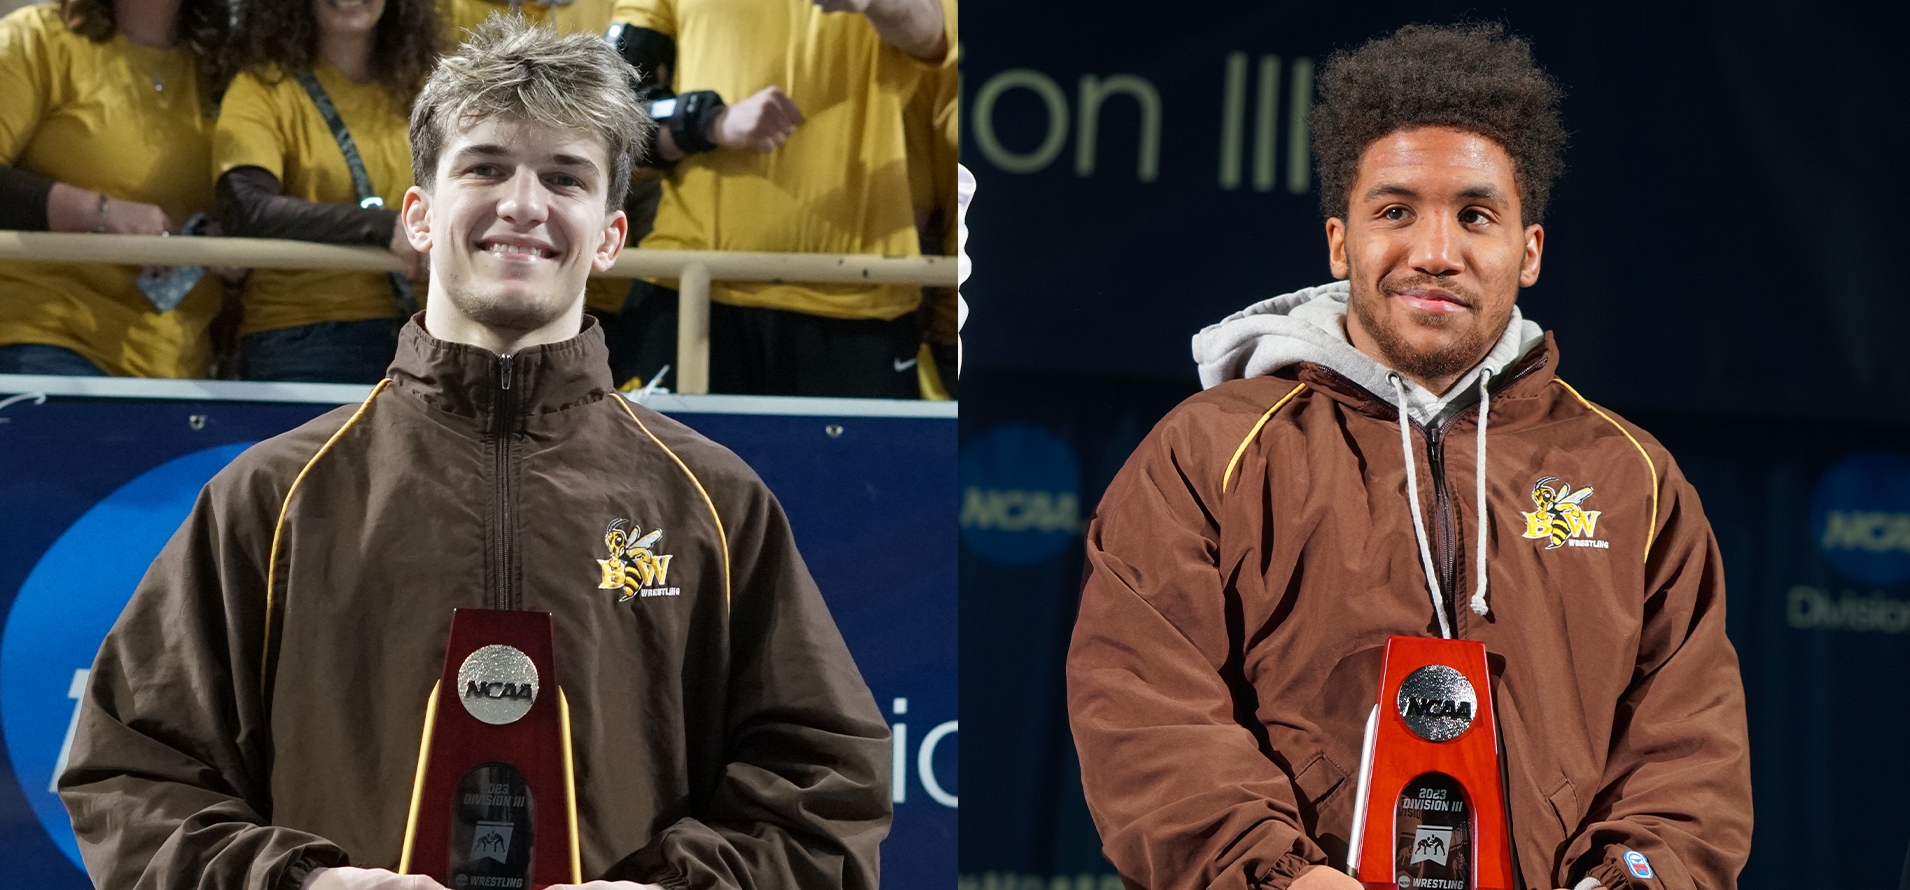 National Champion Michael Petrella (pictured left), National Runner-Up Jacob Decatur (pictured right)